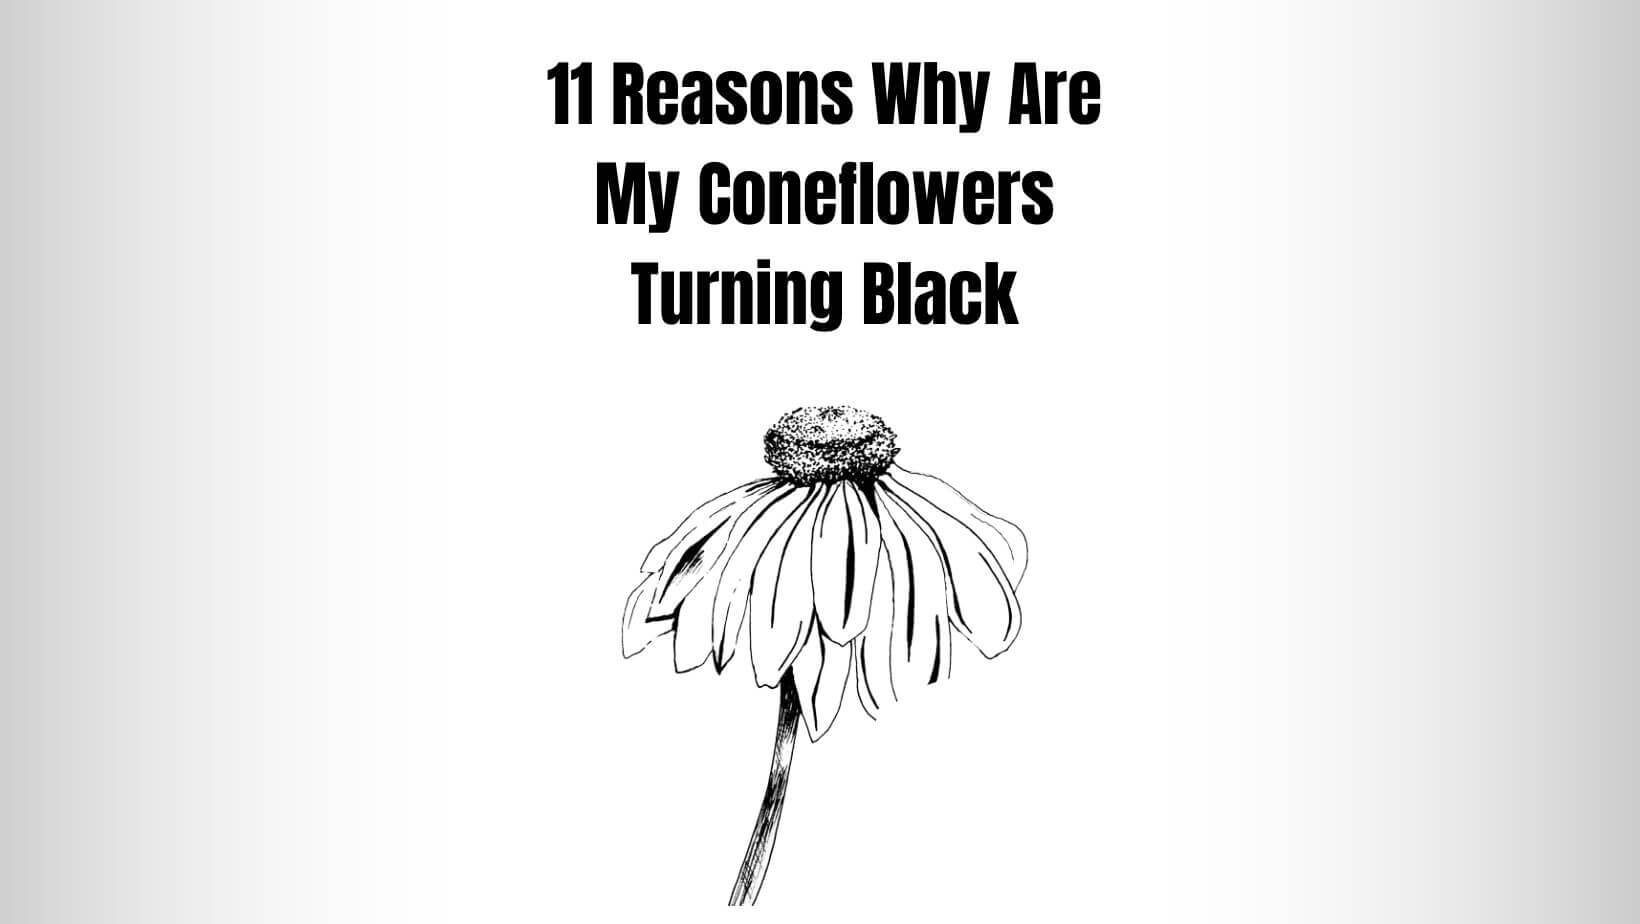 11 Reasons Why Are My Coneflowers Turning Black